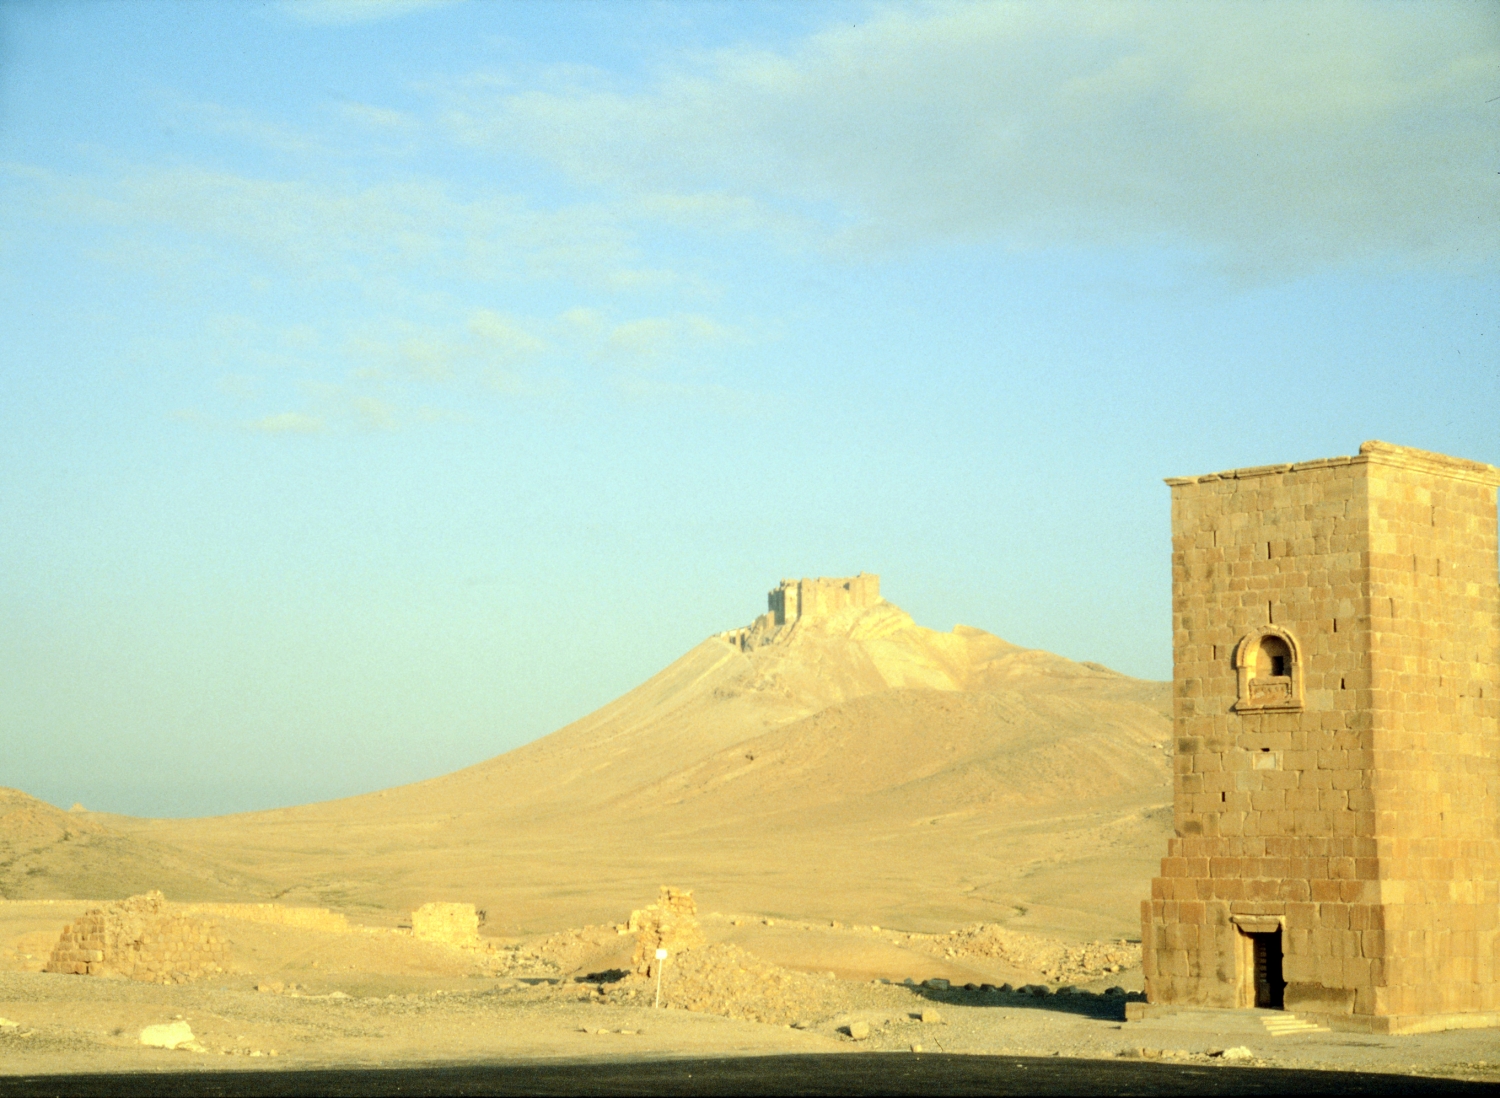 Elahbel Tower Tomb (aka Kubbet el 'Arus; Tower 13) Built 103/563 BH, destroyed August 2015/1463 AH. View of Qal'a ibn Ma'an in the distance.